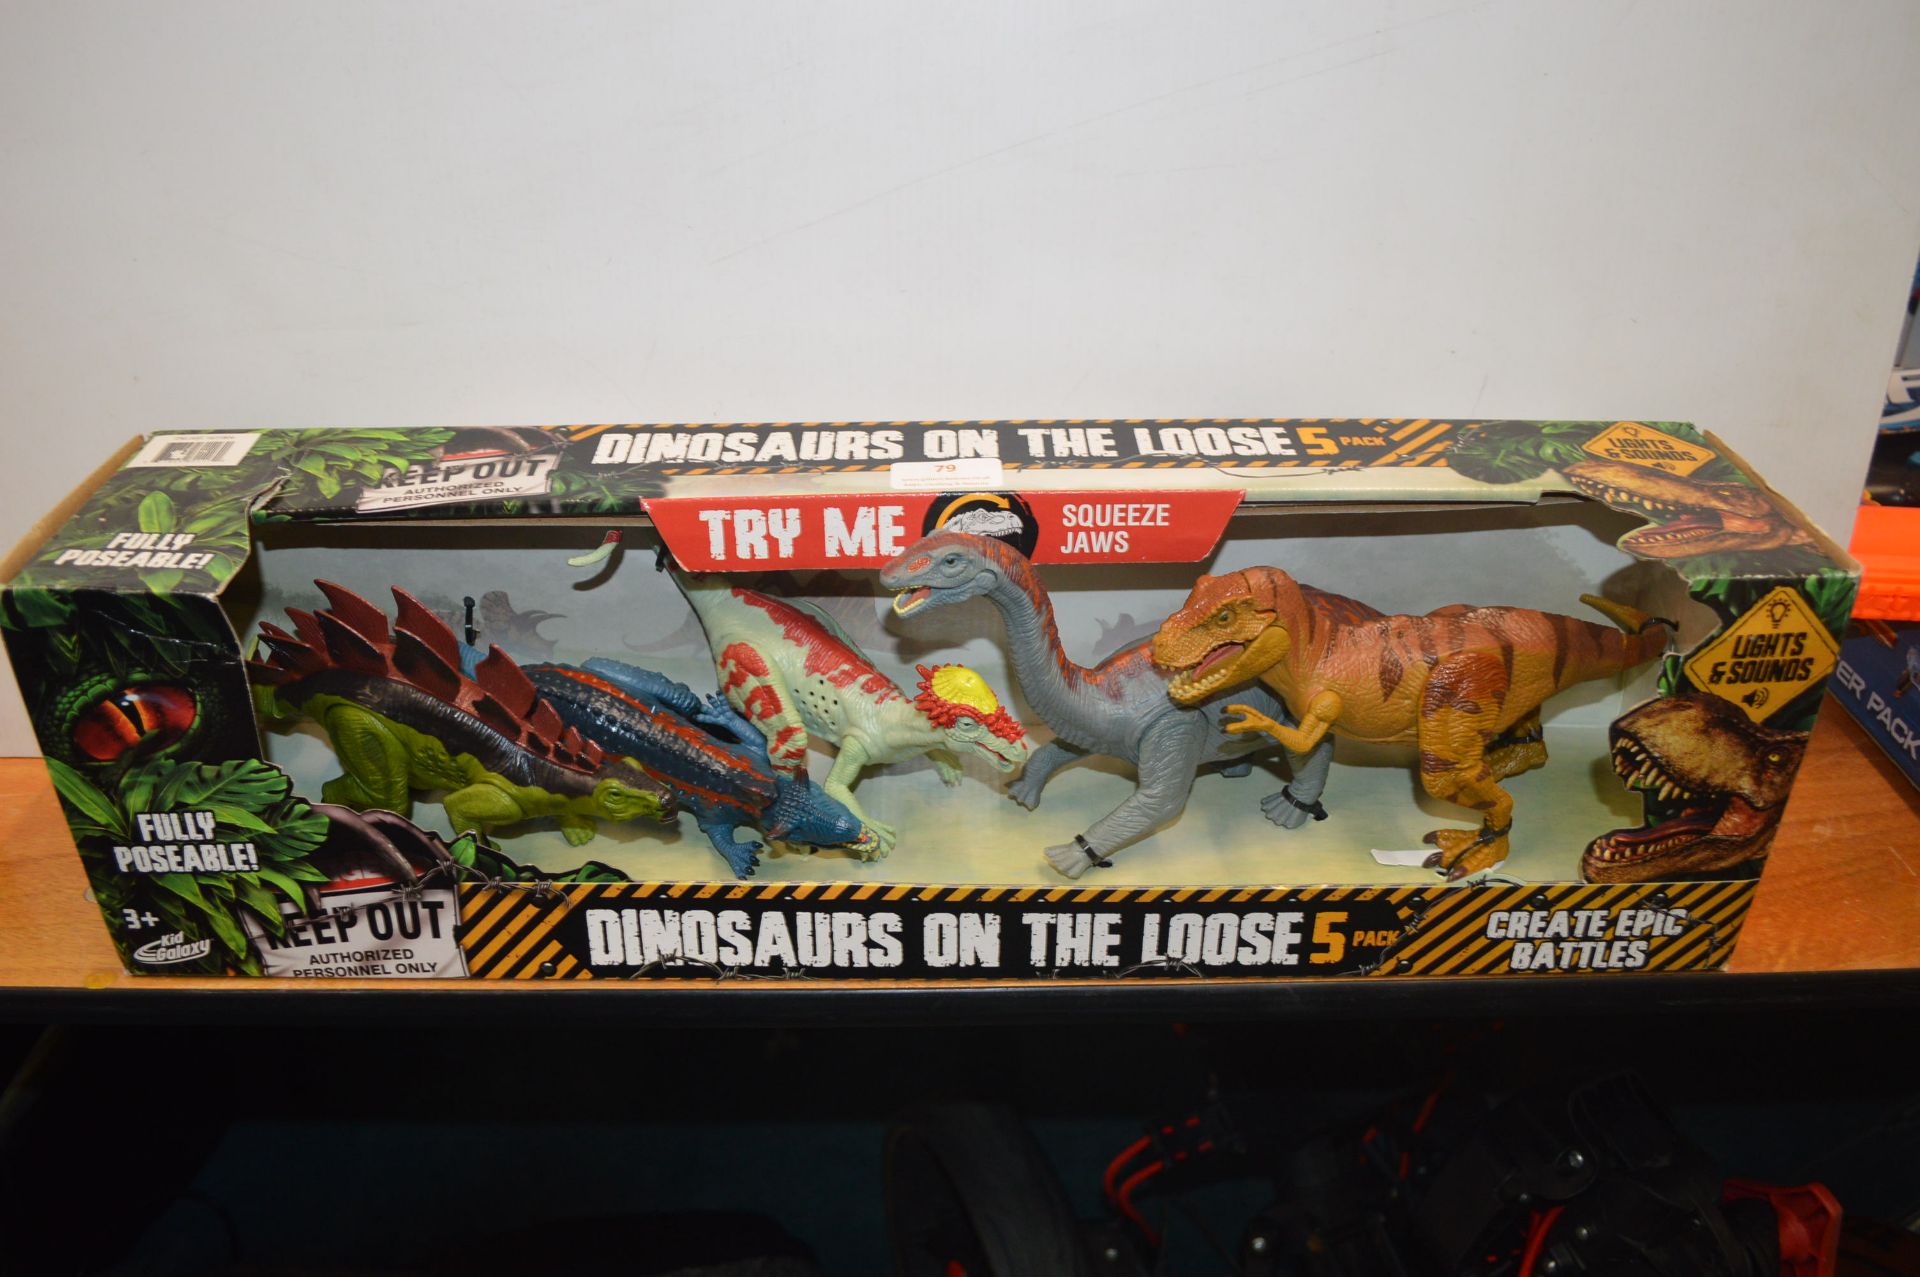 *Dinosaurs On The Loose 5pk